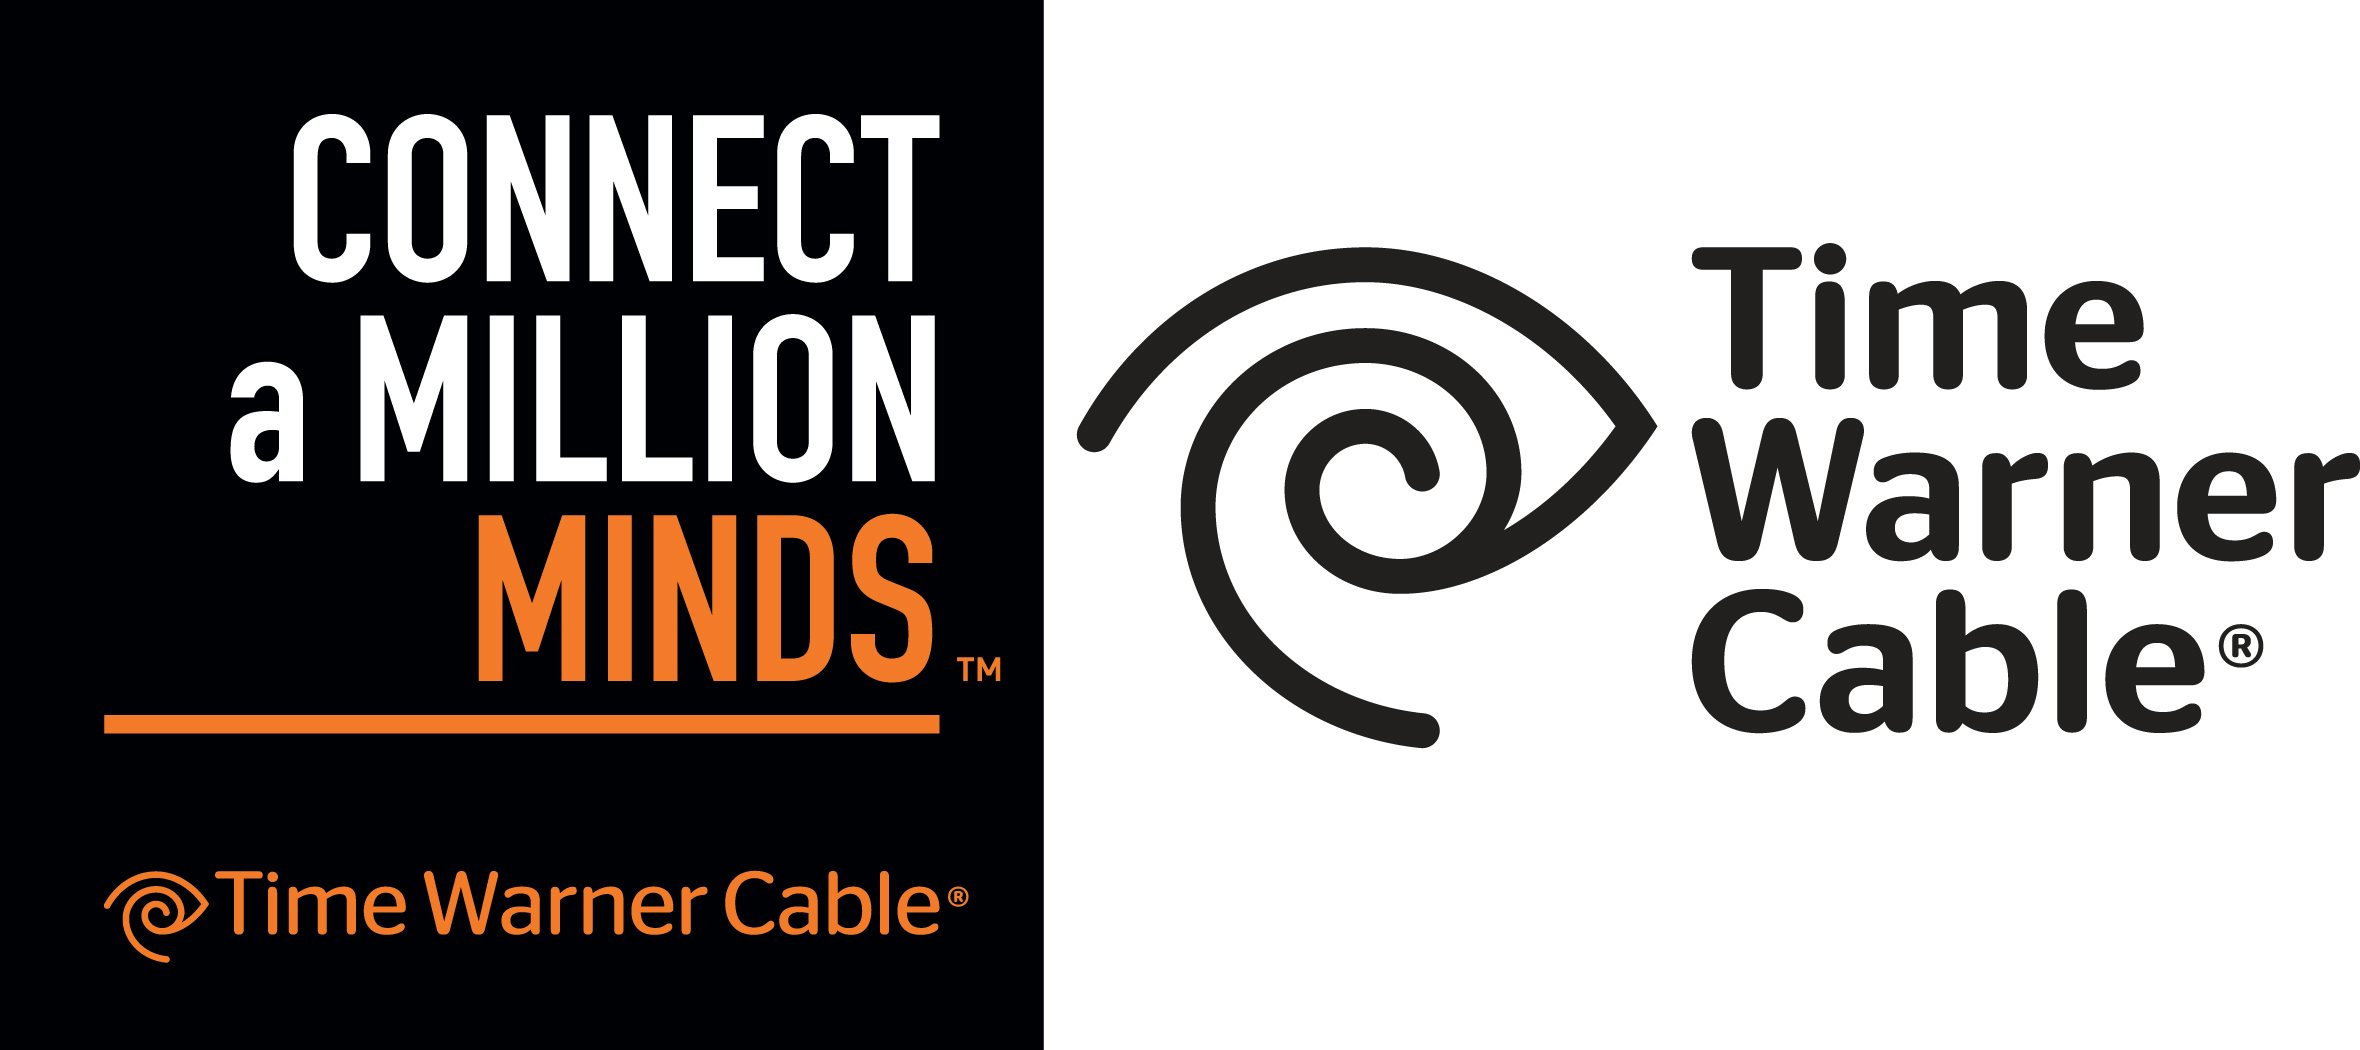 Time Warner Cable/Connect a Million Minds